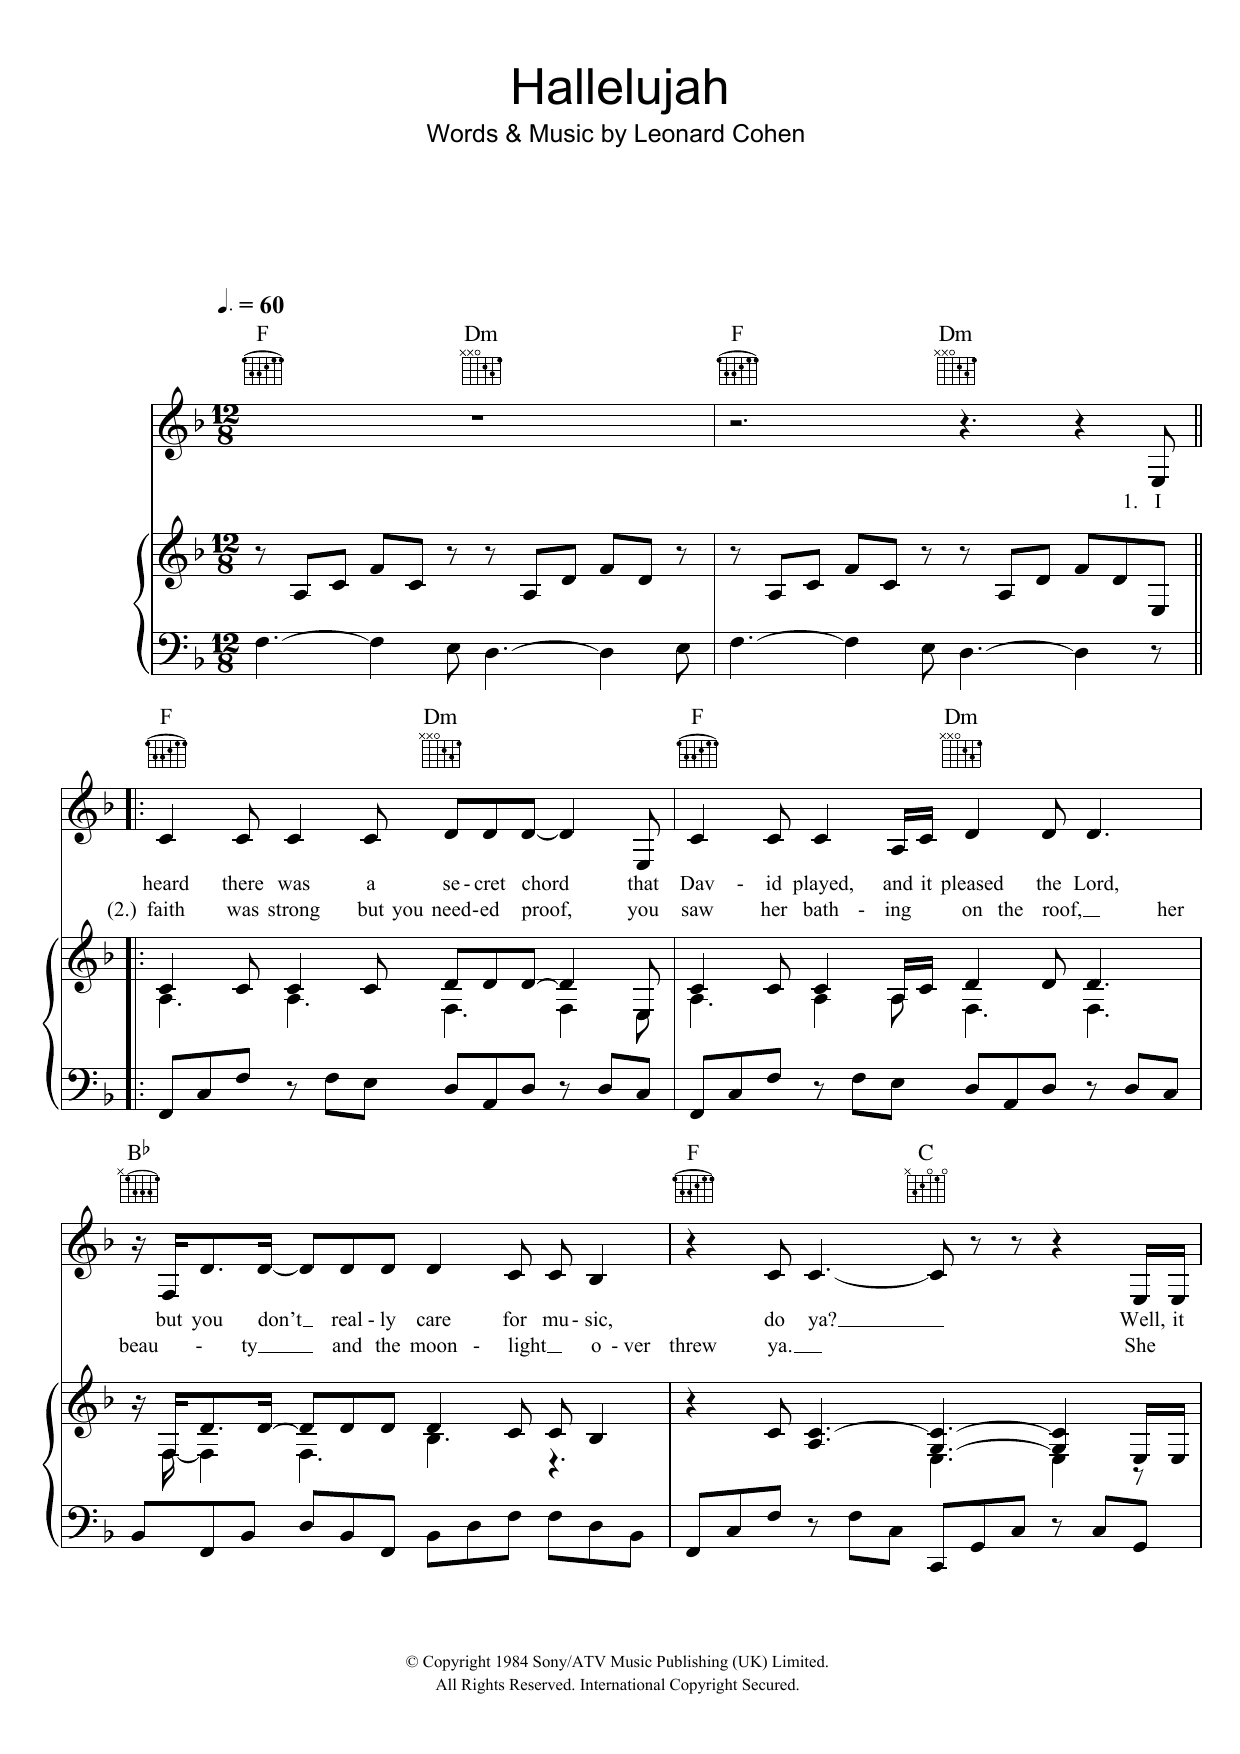 Get Hallelujah sheet music by Leonard Cohen as a digital notation file for Piano...